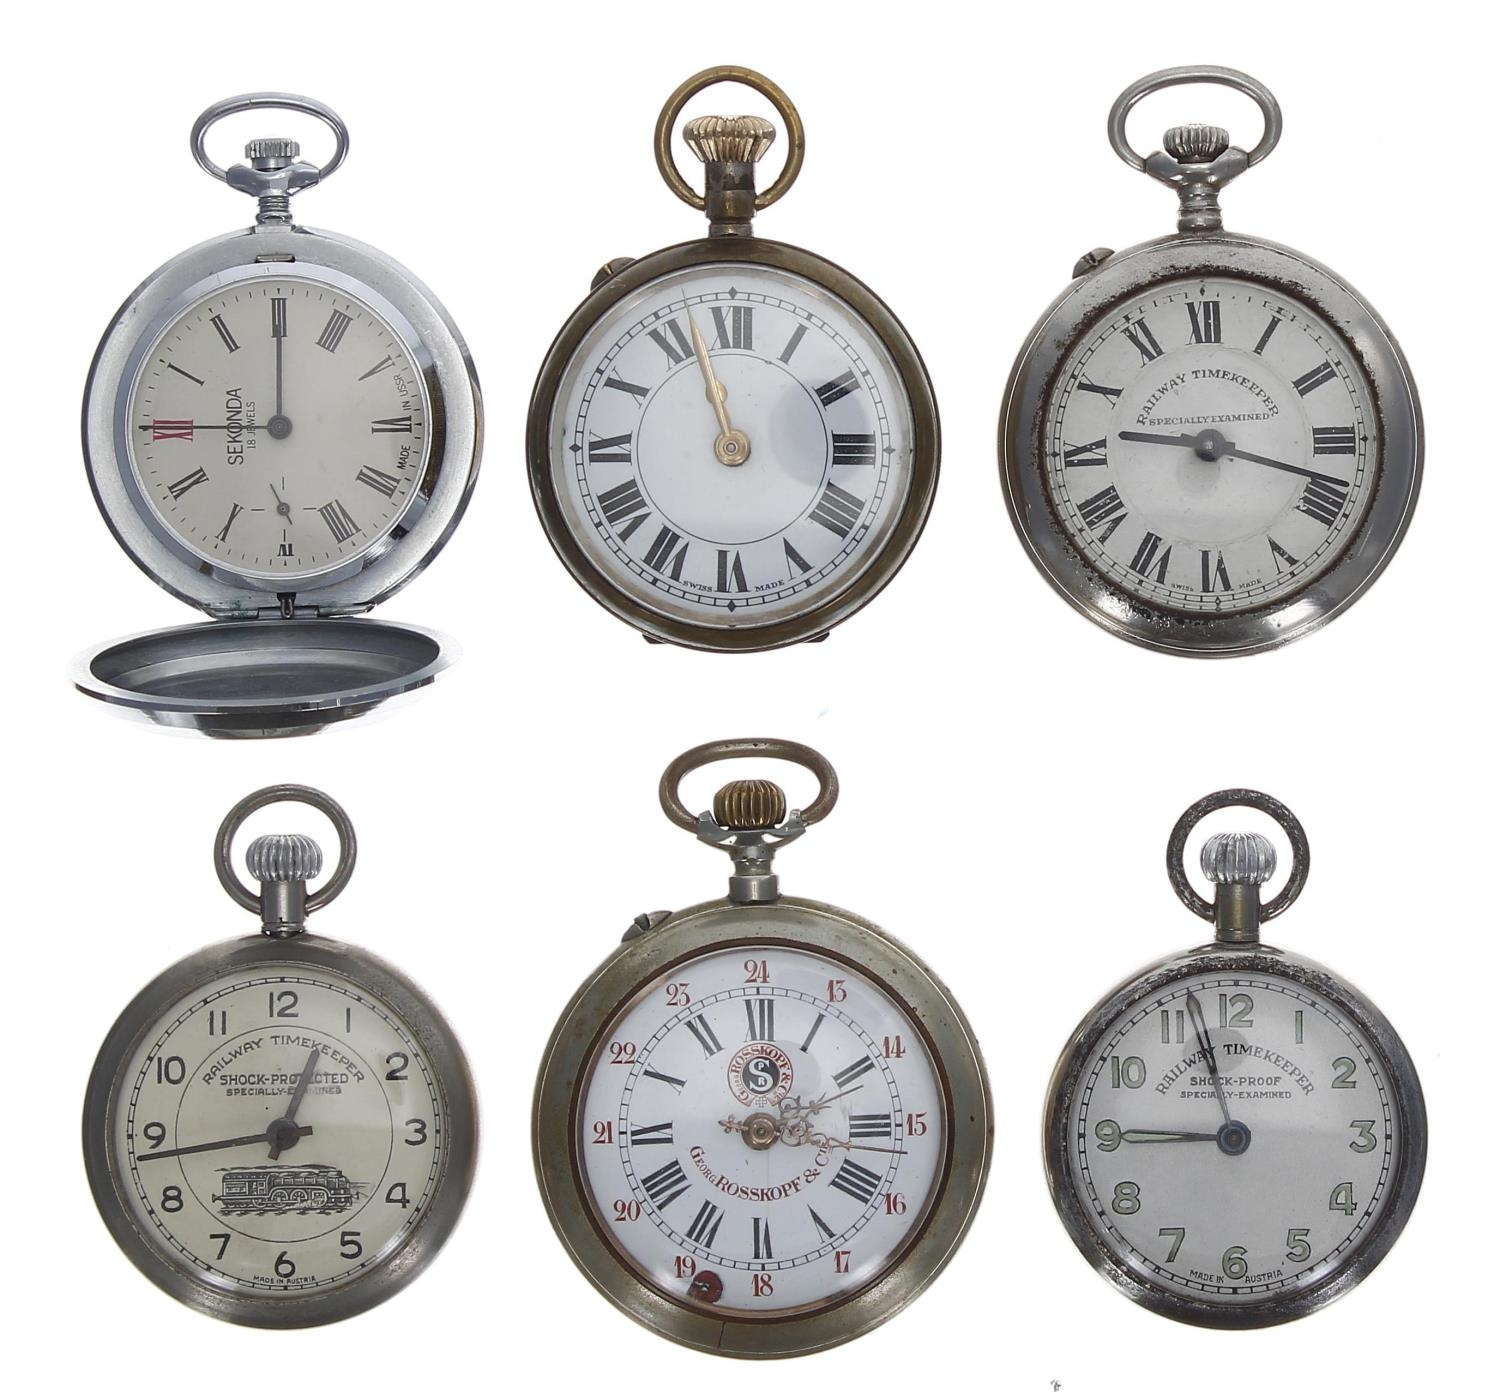 Rosskopf & Co. nickel cased lever pocket watch, 57mm; together with three nickel/chrome cased '